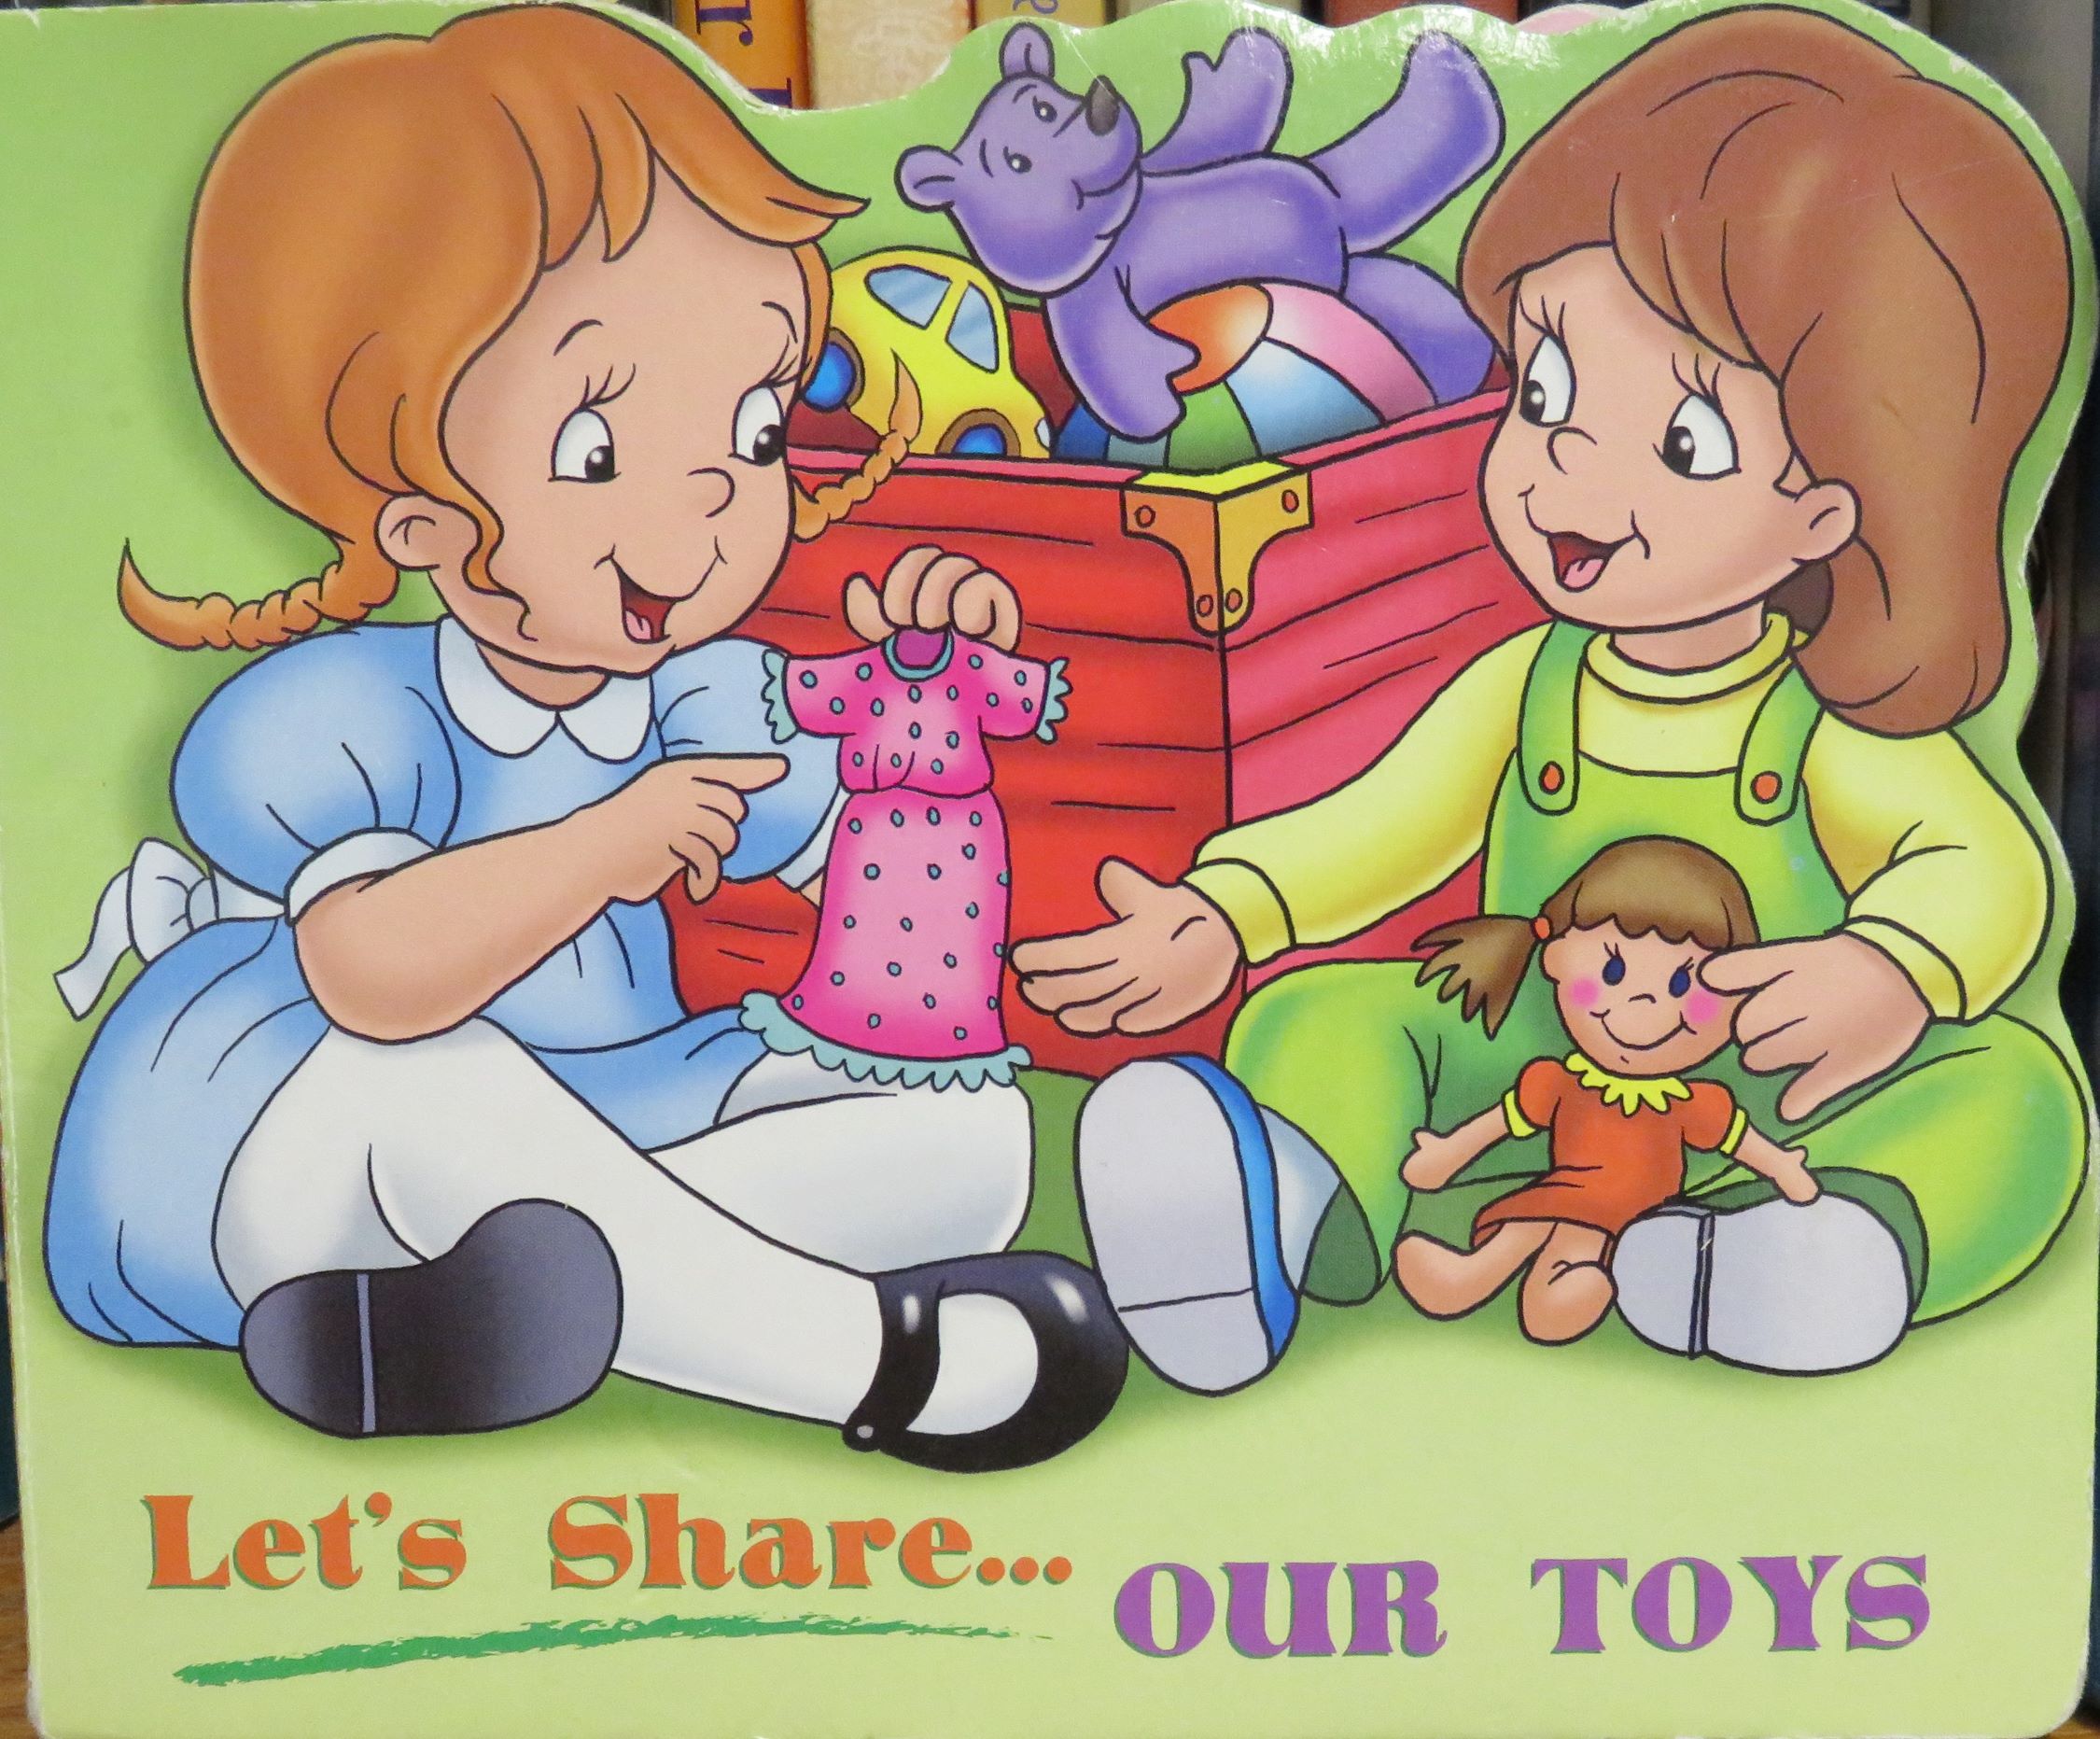 Let’s Share. . .Our Toys